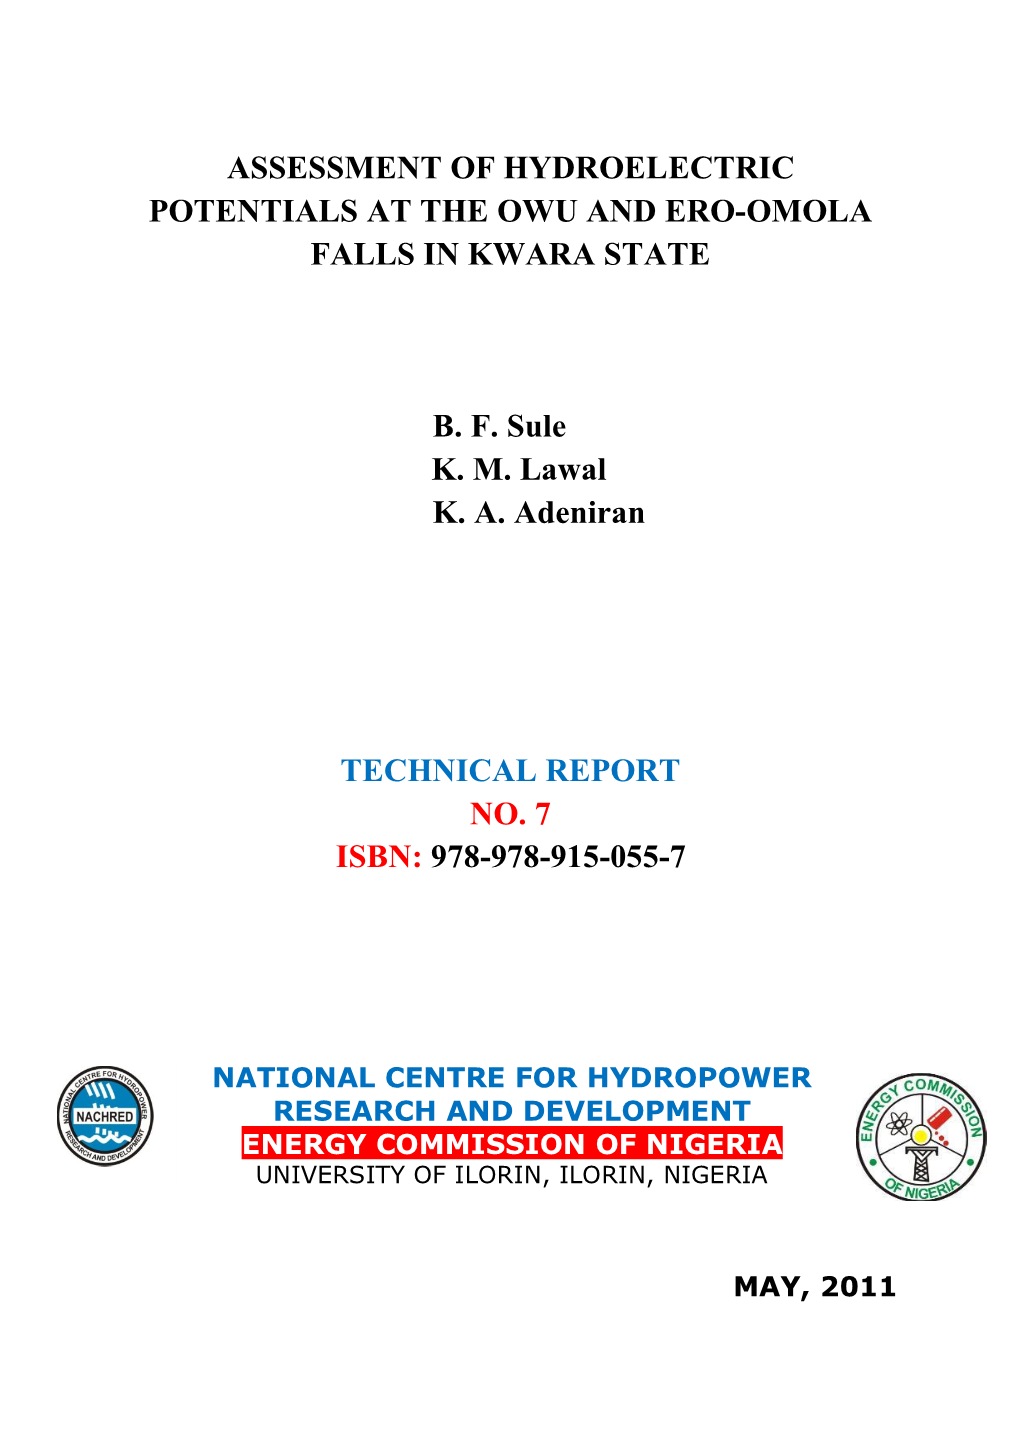 Assessment of Hydroelecric Potentials of Owu and Ero-Omola Falls in Kwara State, Nigeria